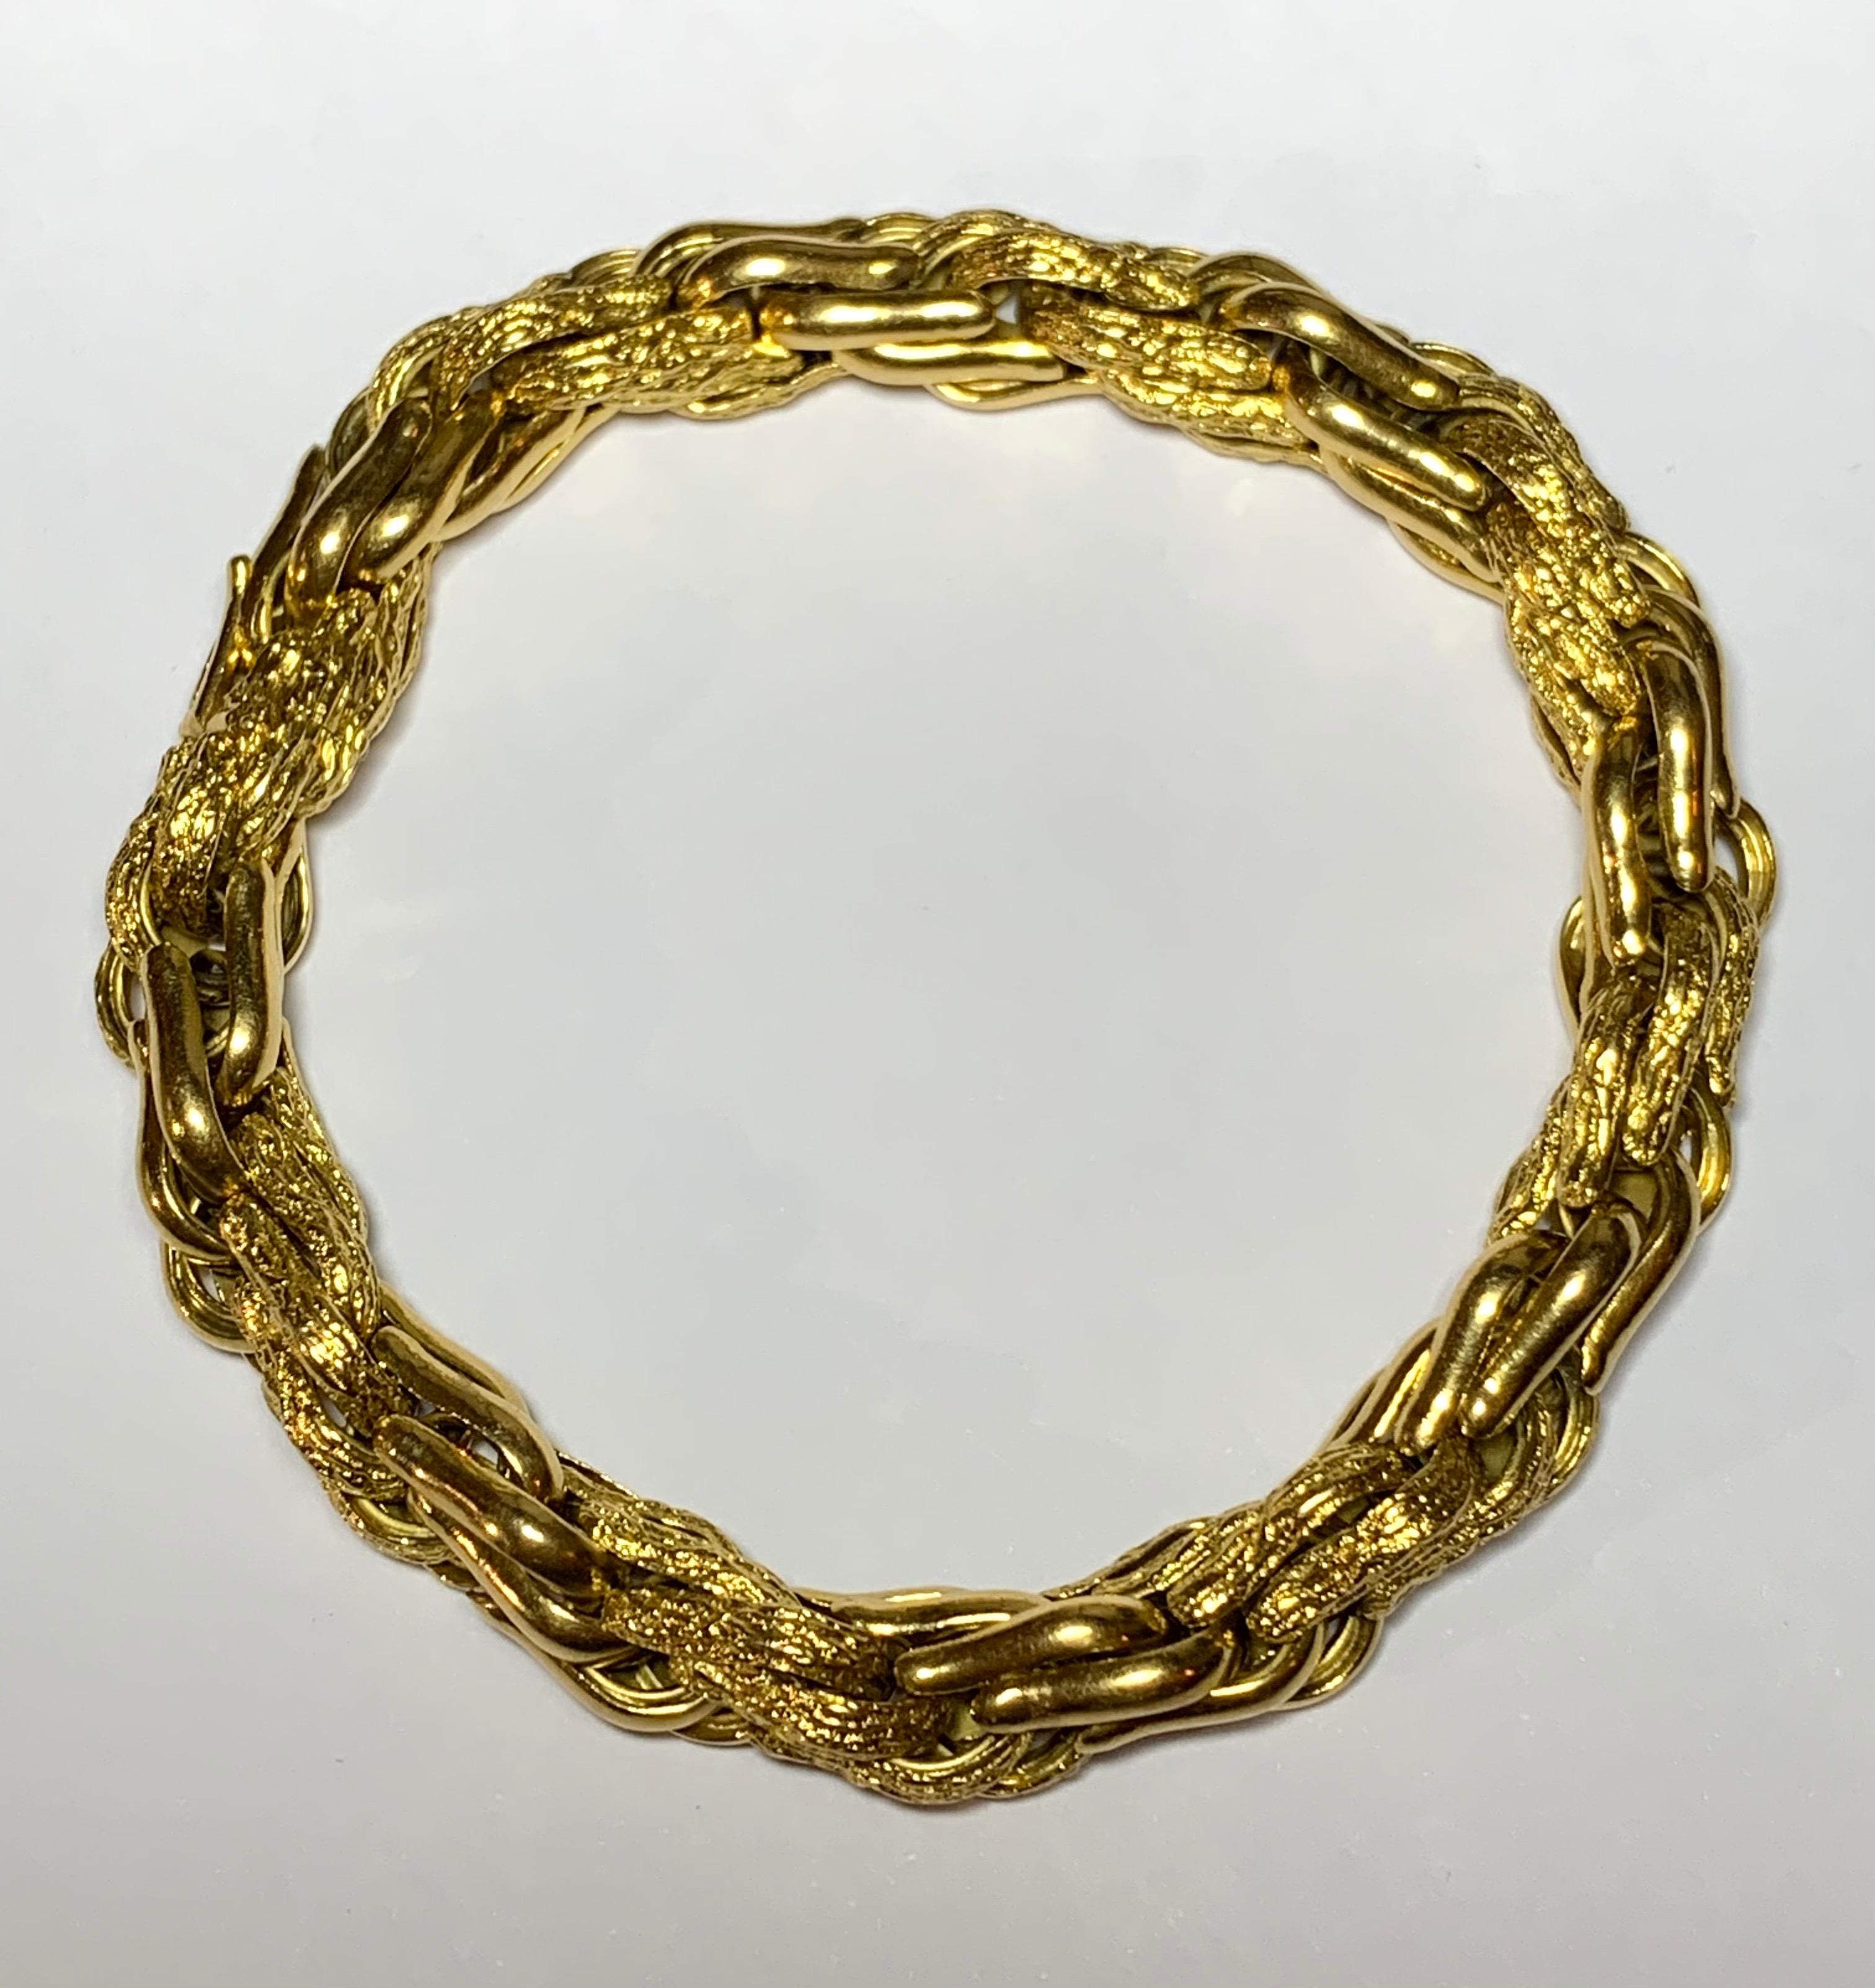 A fine bracelet manufactured by Georges Lenfant for Boucheron. Lenfant is renowned for creating some of the most desirable gold jewellery of the 20th century for houses such as Cartier, VCA and in this instance, Boucheron. This rare link features